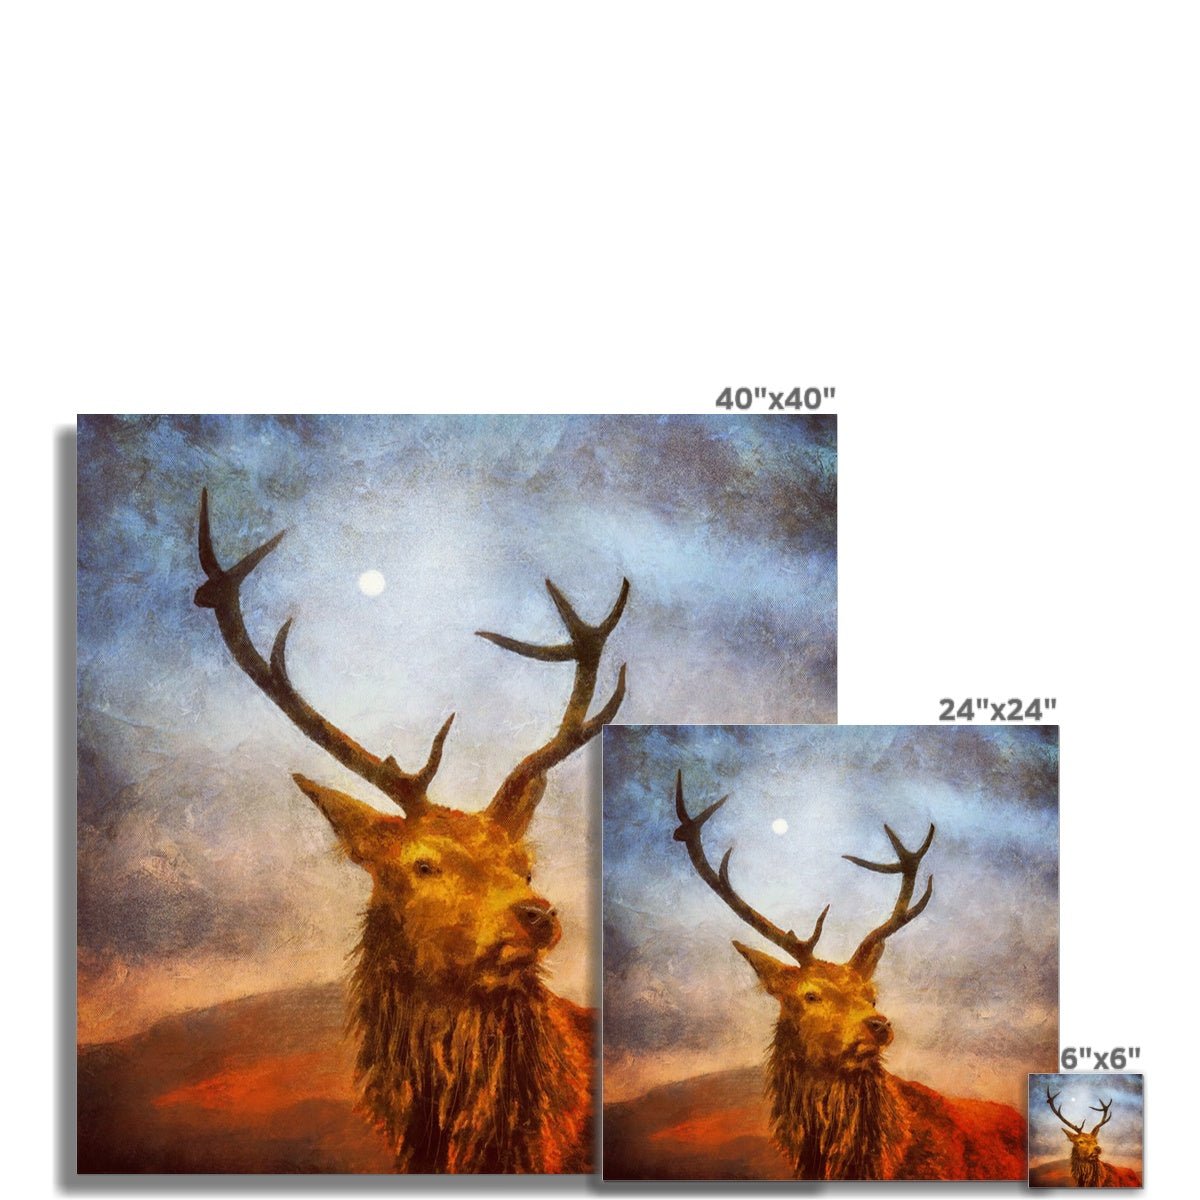 A Moonlit Highland Stag Painting | Fine Art Prints From Scotland-Unframed Prints-Scottish Highlands & Lowlands Art Gallery-Paintings, Prints, Homeware, Art Gifts From Scotland By Scottish Artist Kevin Hunter